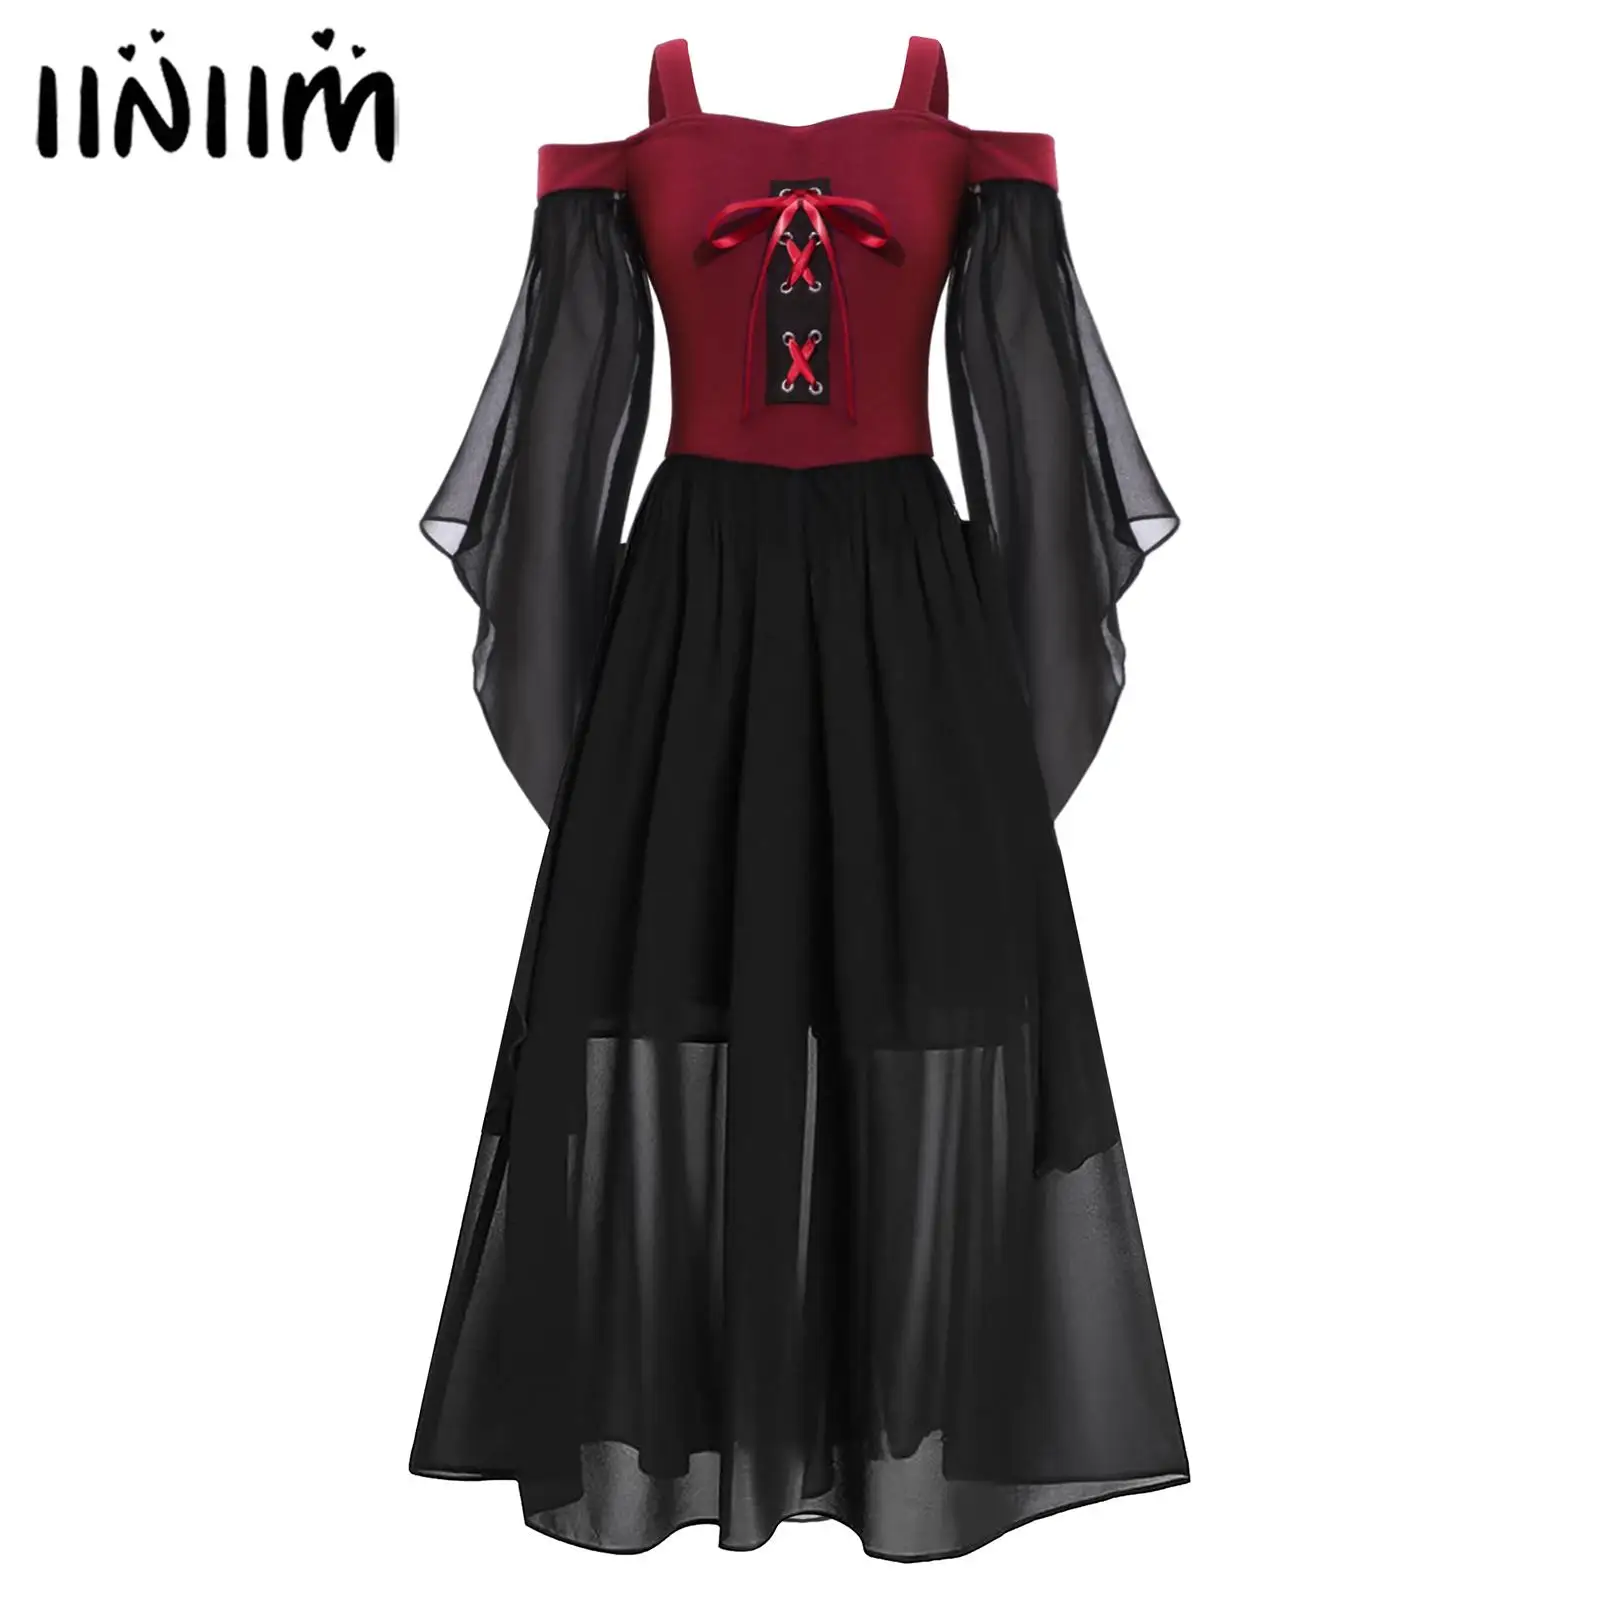 

Girls Elf Princess Lolita Party Dress Medieval Renaissance Gothic Cosplay Costume Butterfly Sleeve Lace Up Front Flowy Dress